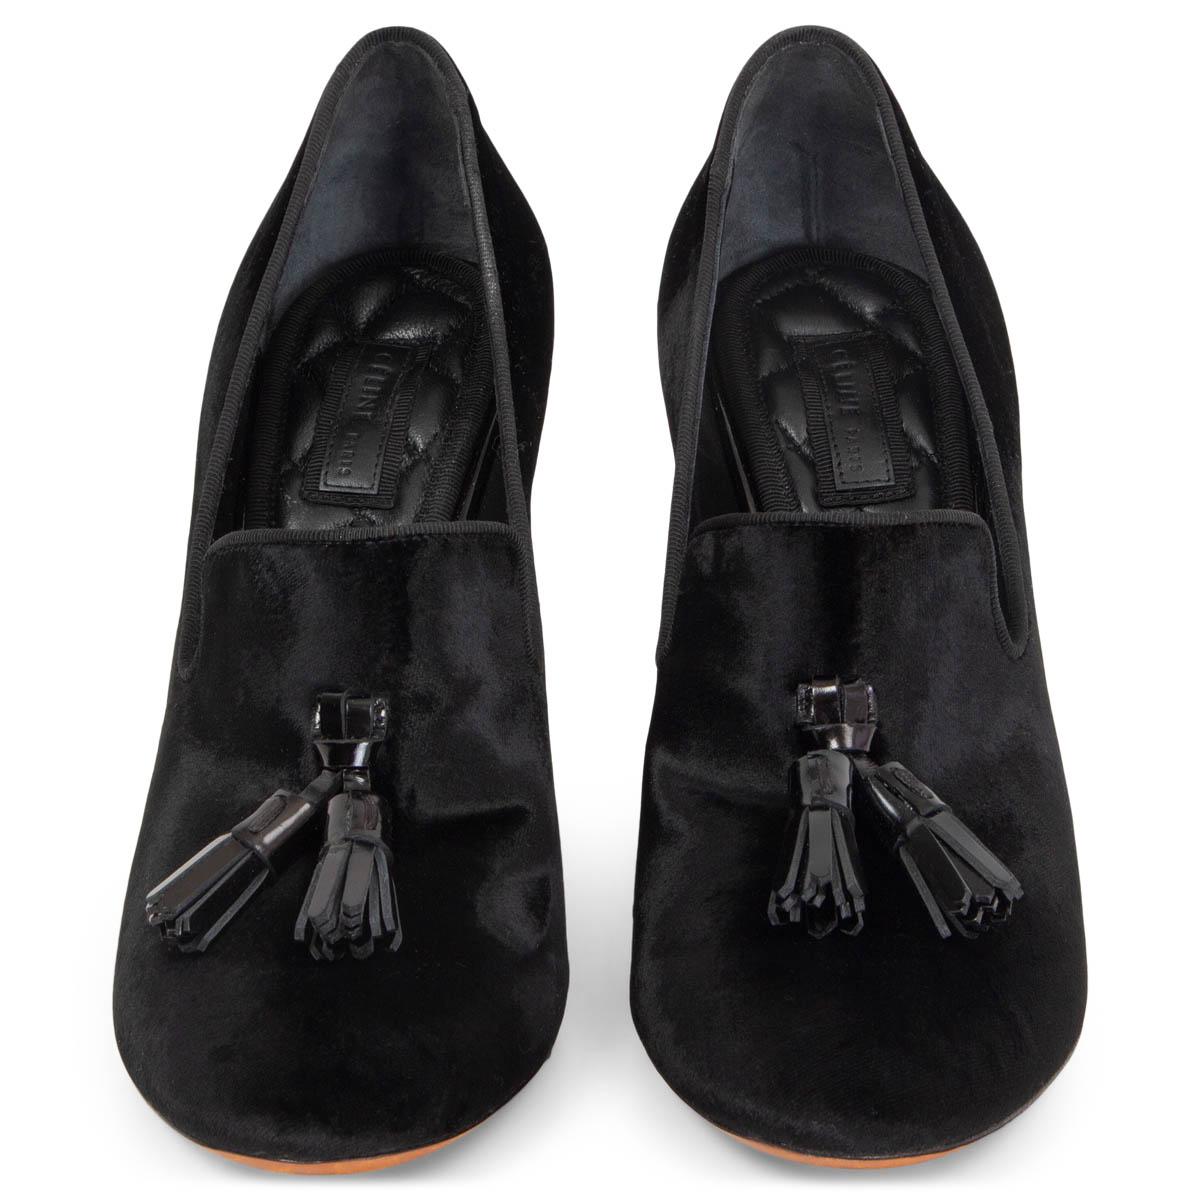 100% authentic Céline pumps in black velvet embellished with two leather tassels at front and a quilted leather sole. Have been worn once inside and are in virtually new condition. 

Measurements
Imprinted Size	40
Shoe Size	40
Inside Sole	26.5cm